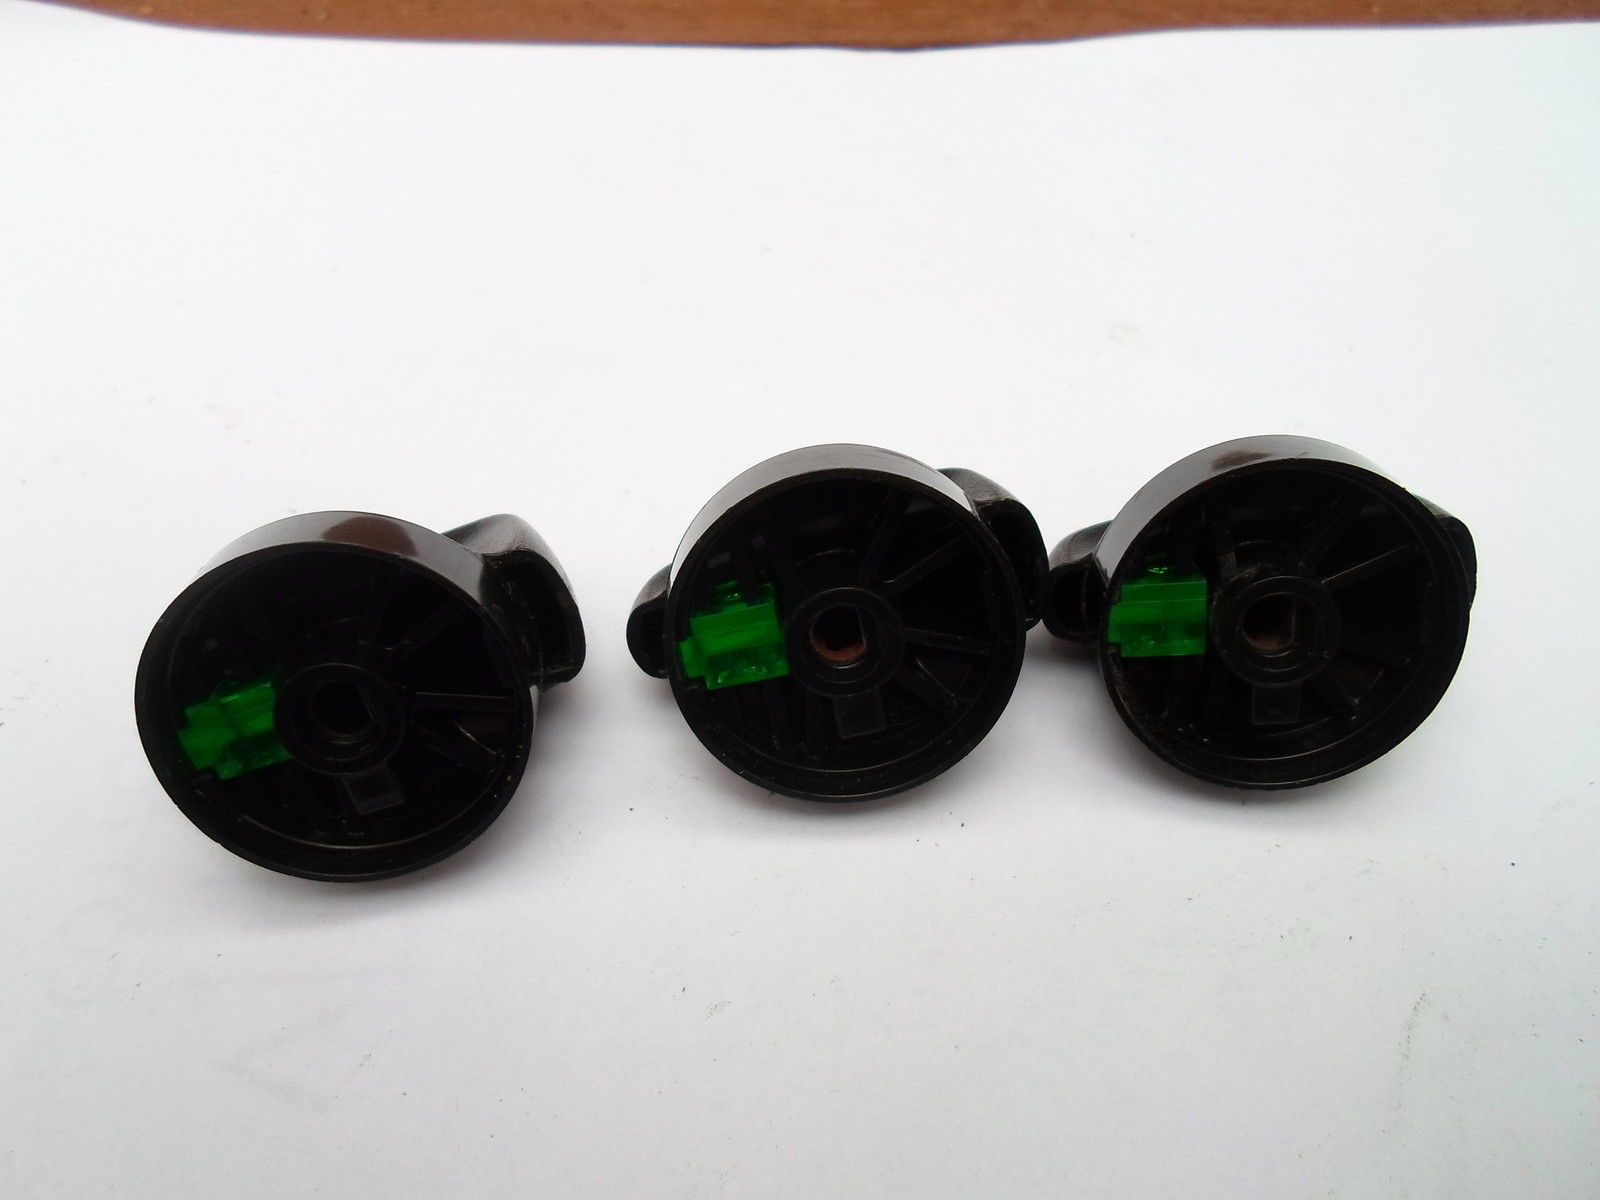 95 - 04 FORD RANGER  GREEN CLIMATE CONTROL KNOB SET OF 3 OEM FREE SHIPPING